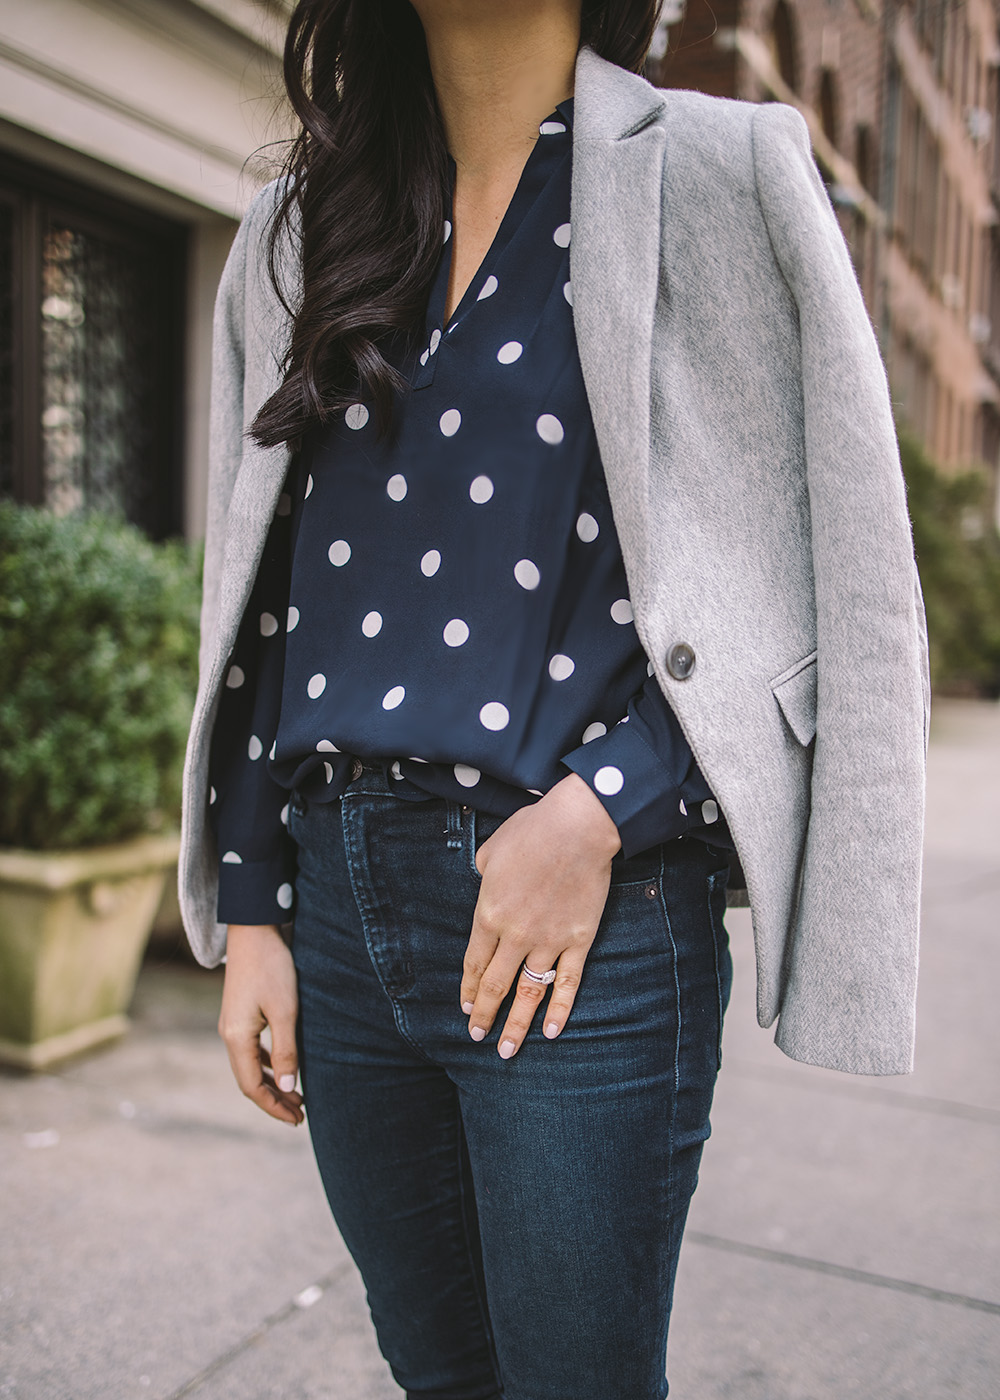 Business Casual Work Outfit Idea / Grey Blazer & Polka Dot Blouse